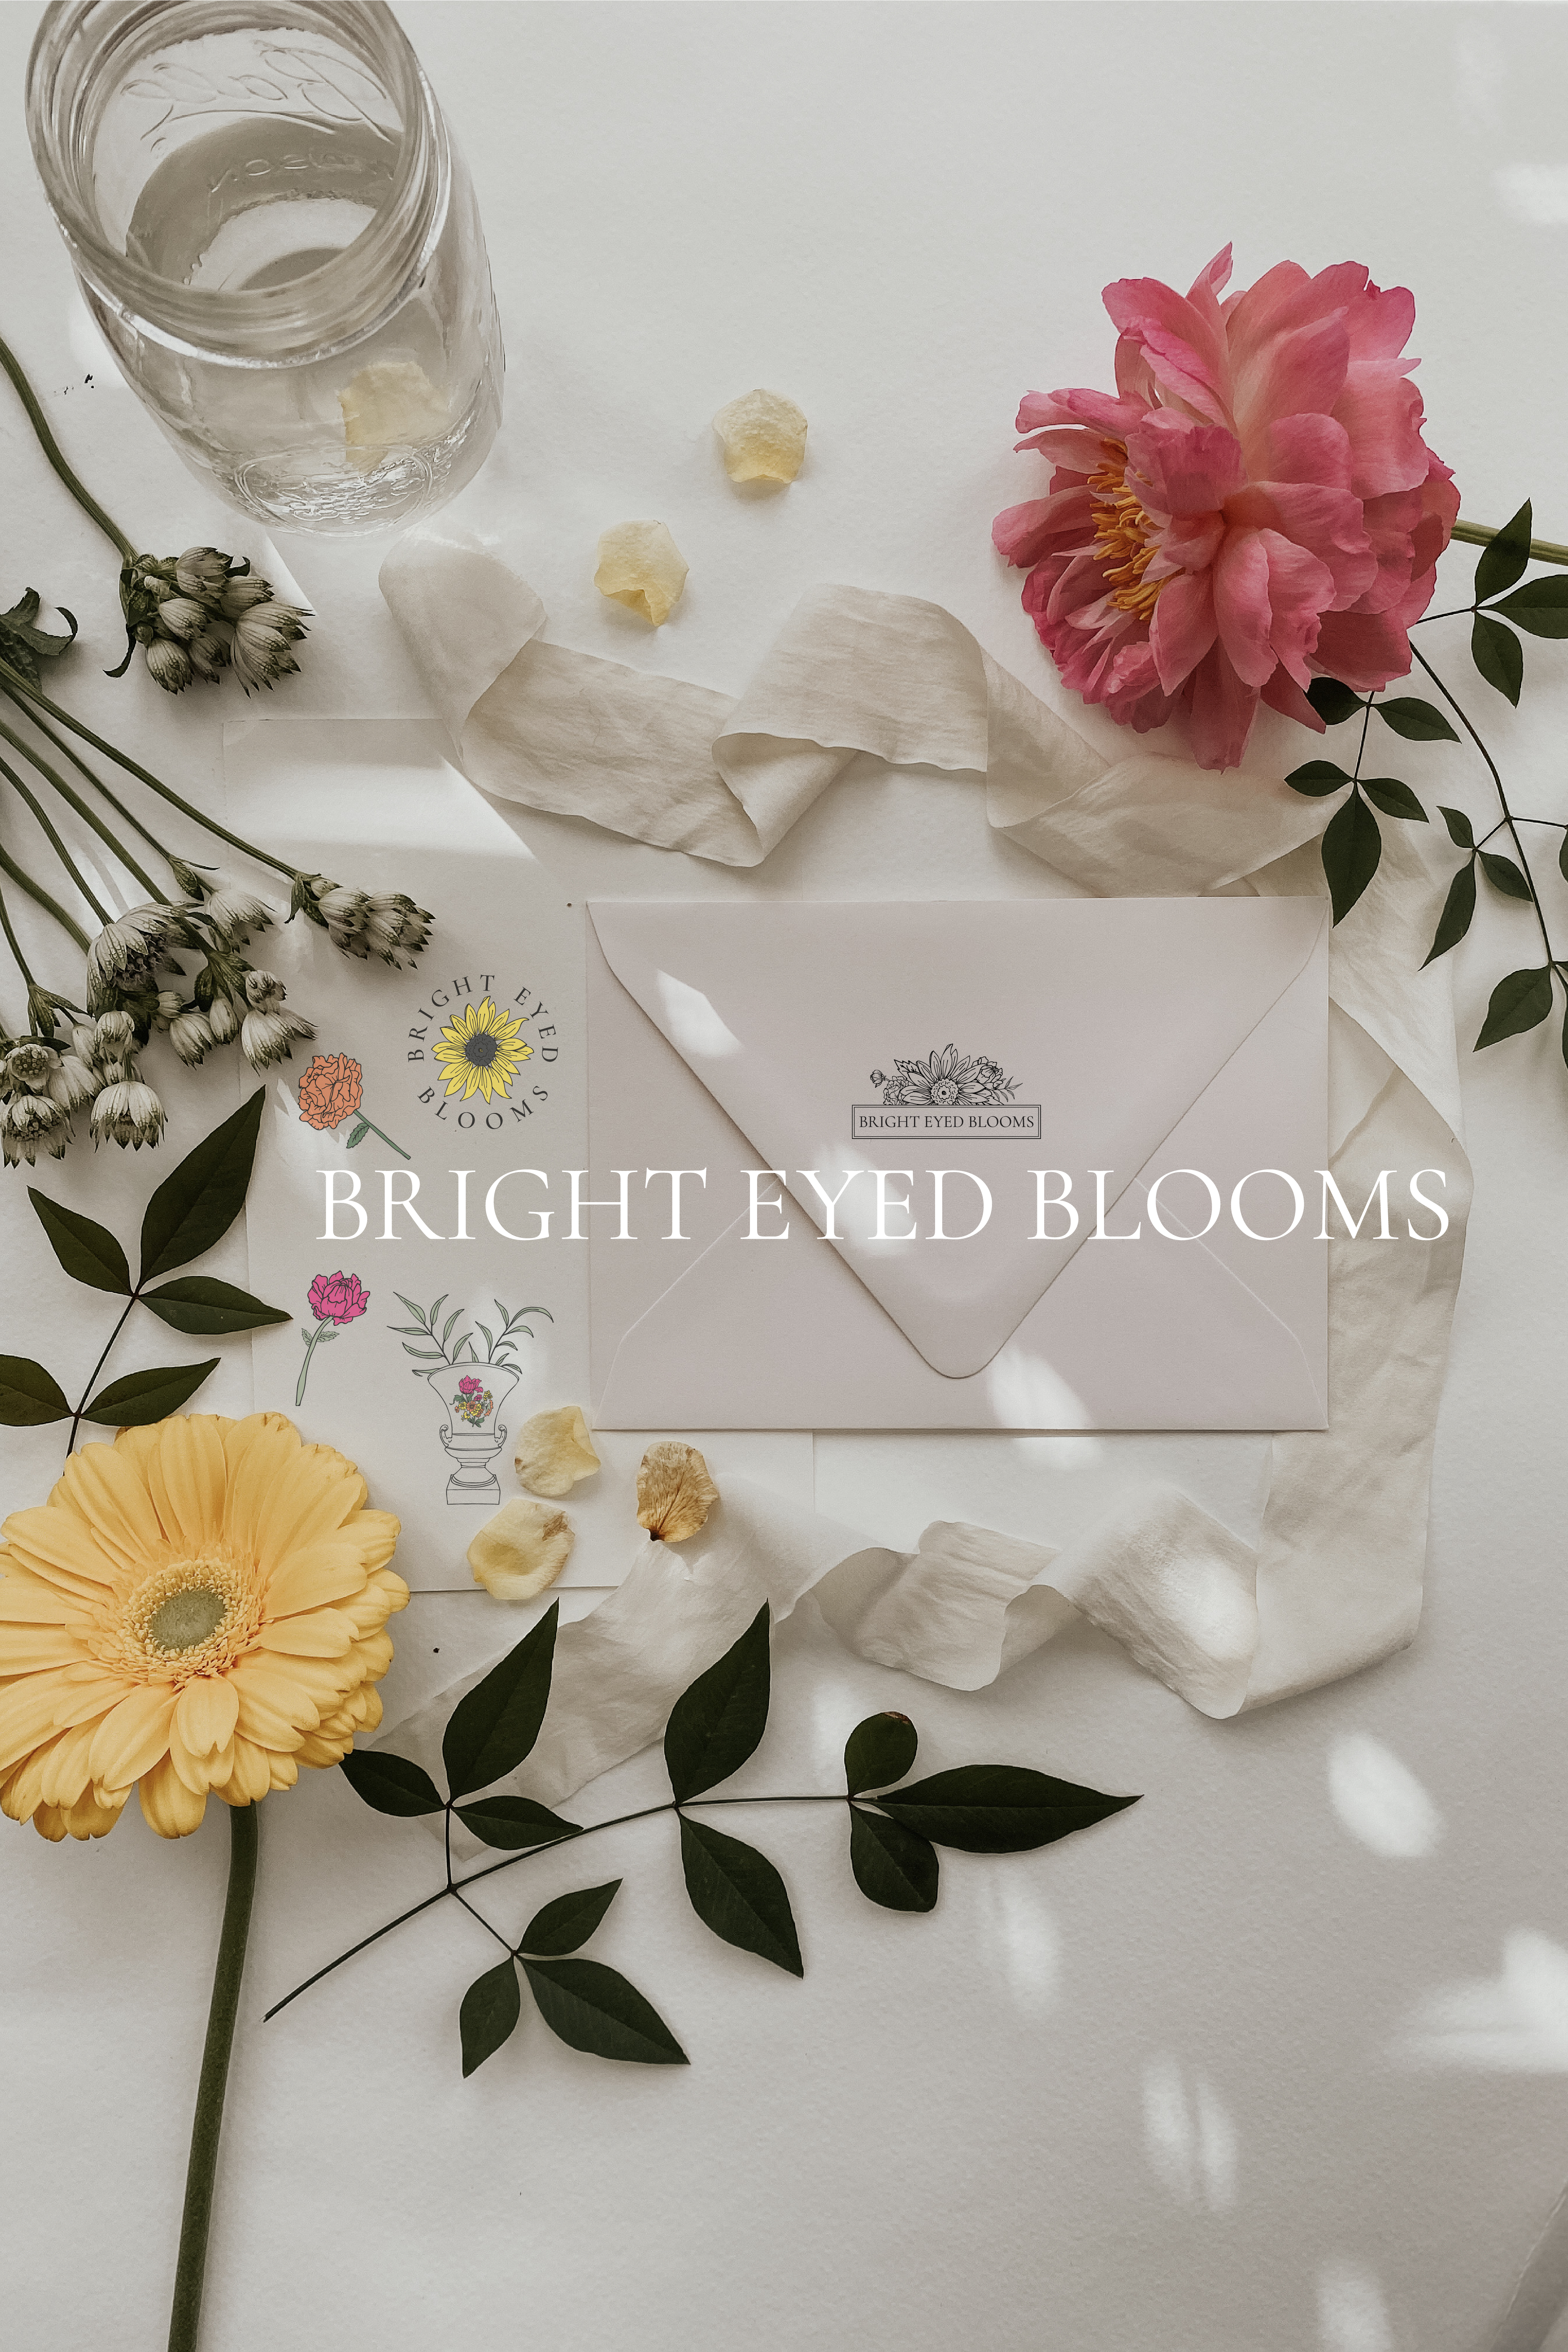 Bright Eyed Blooms brand design reveal